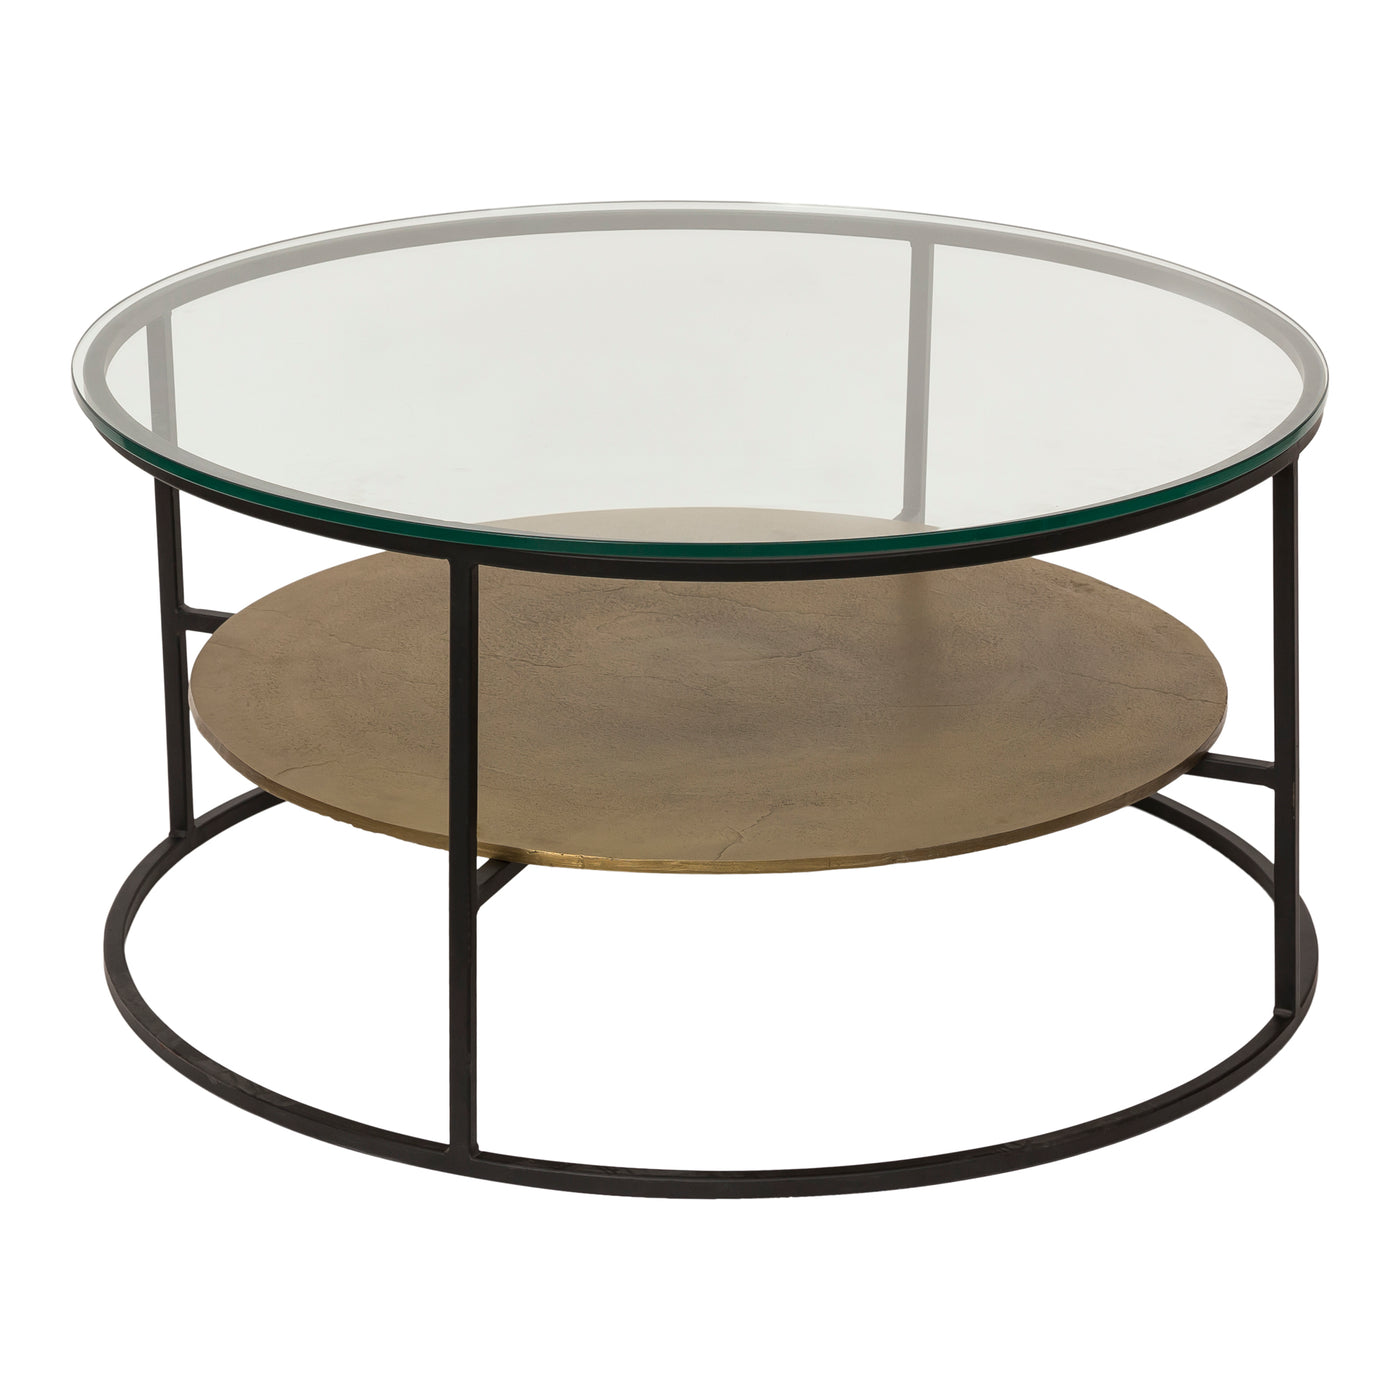 The stylish Callie Coffee Table features a circular design with a  fixed metal shelf in a brass finish, visible through th...